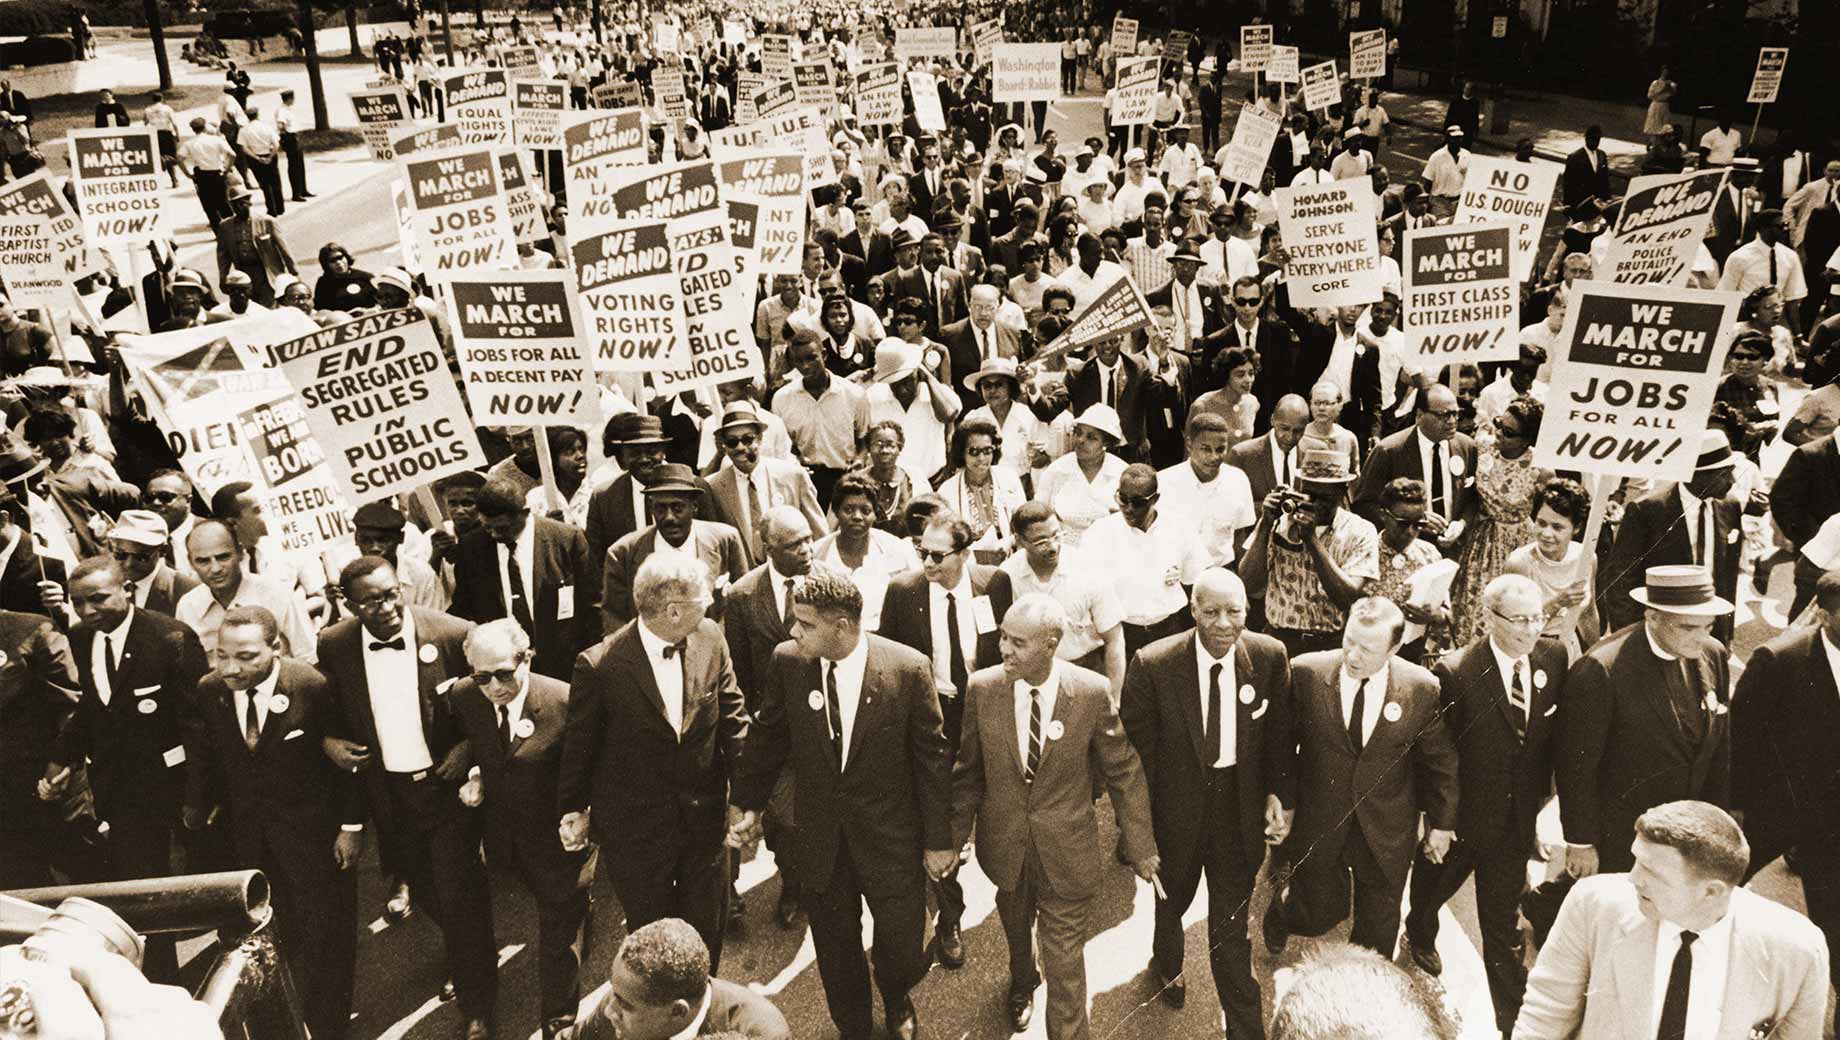 Protests Seen as Harming Civil Rights Movement in the '60s